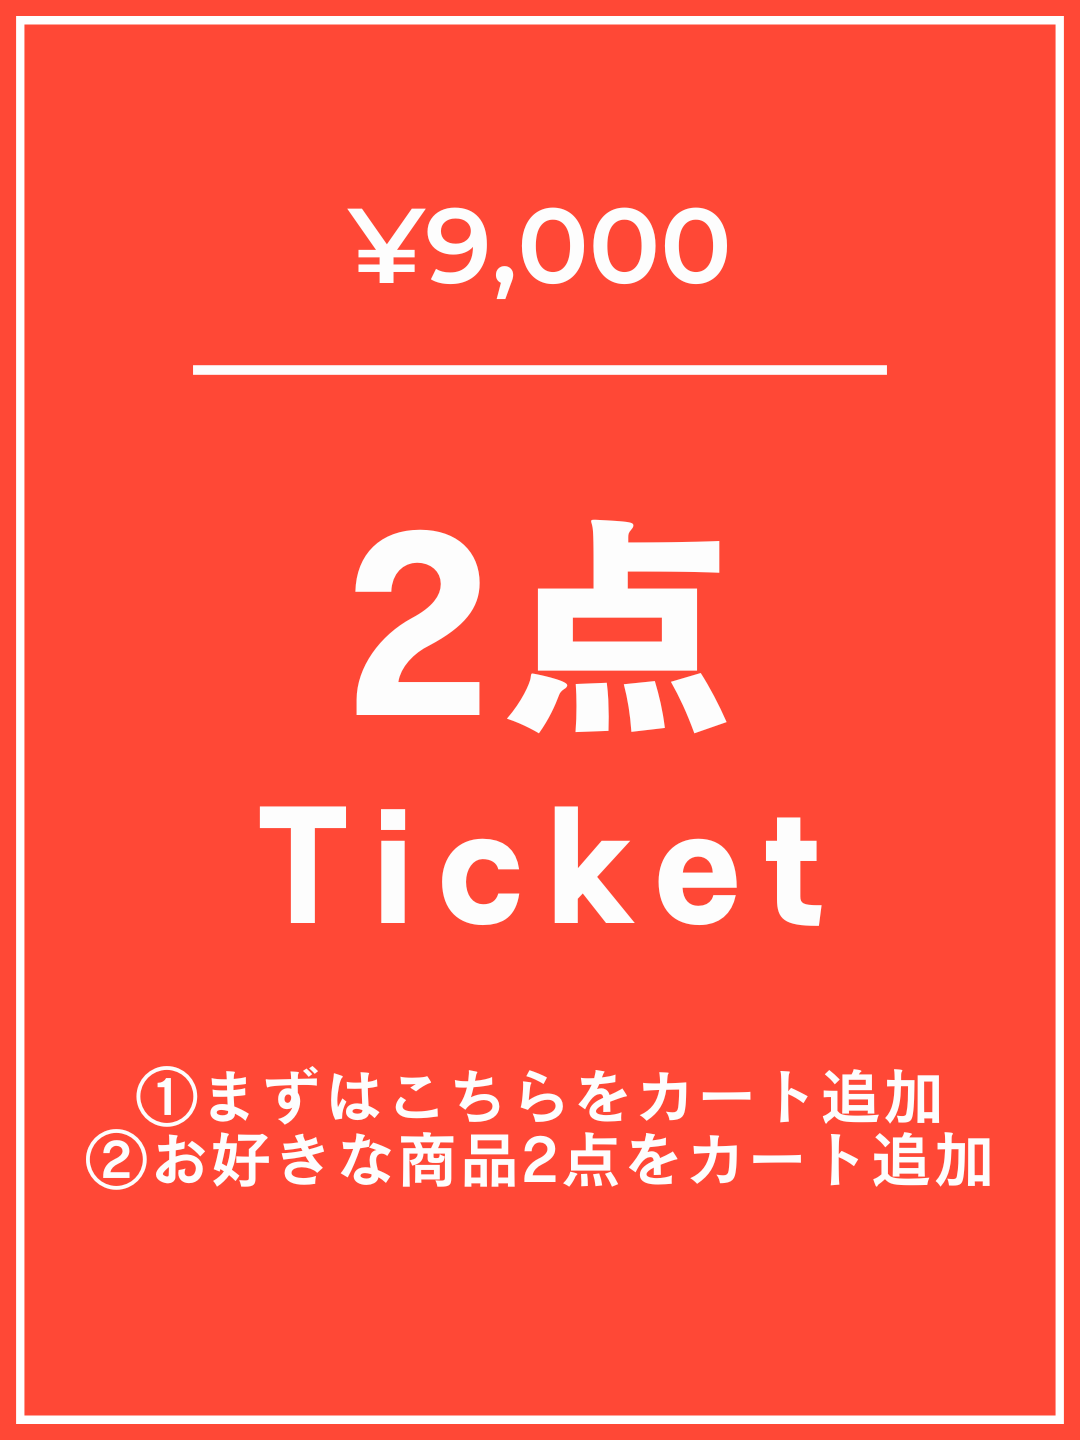 [Add this to your cart first] ¥9,000 ticket 